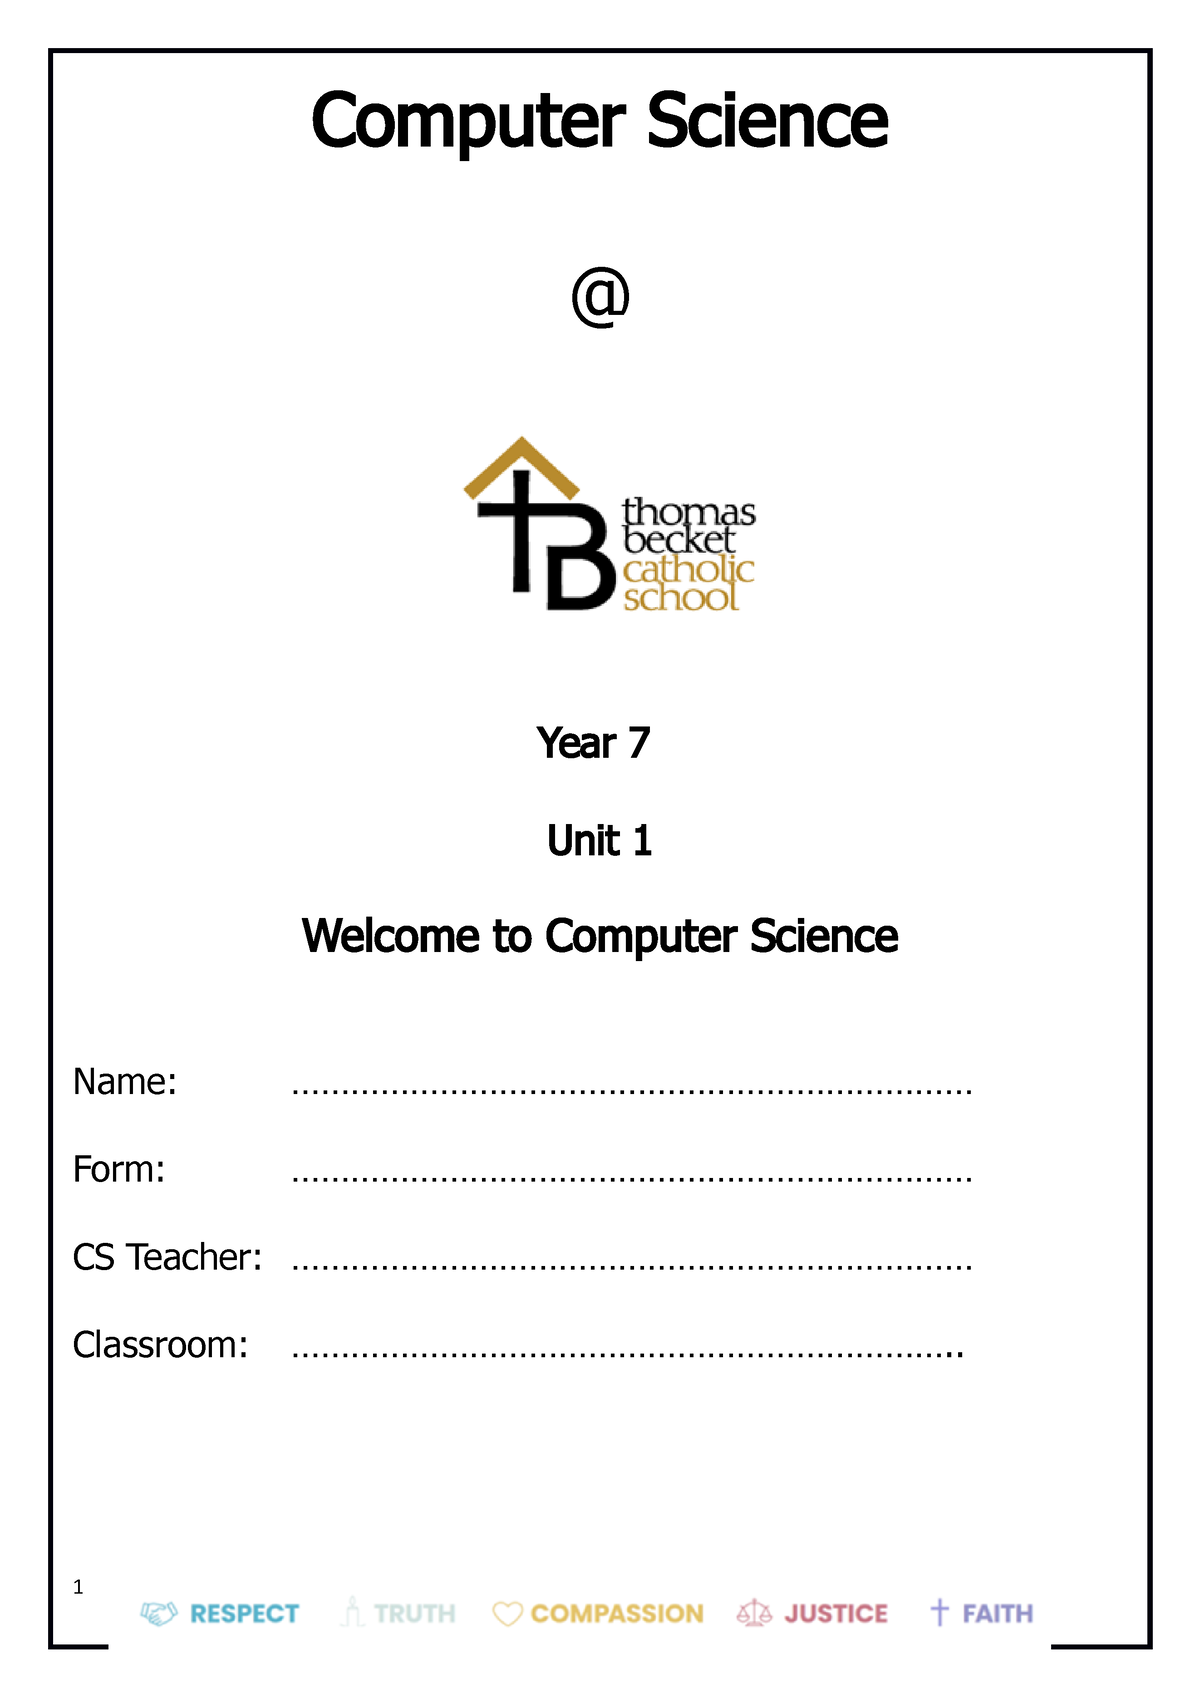 computing notes - Computer Science @ Year 7 Unit 1 Welcome to Computer ...